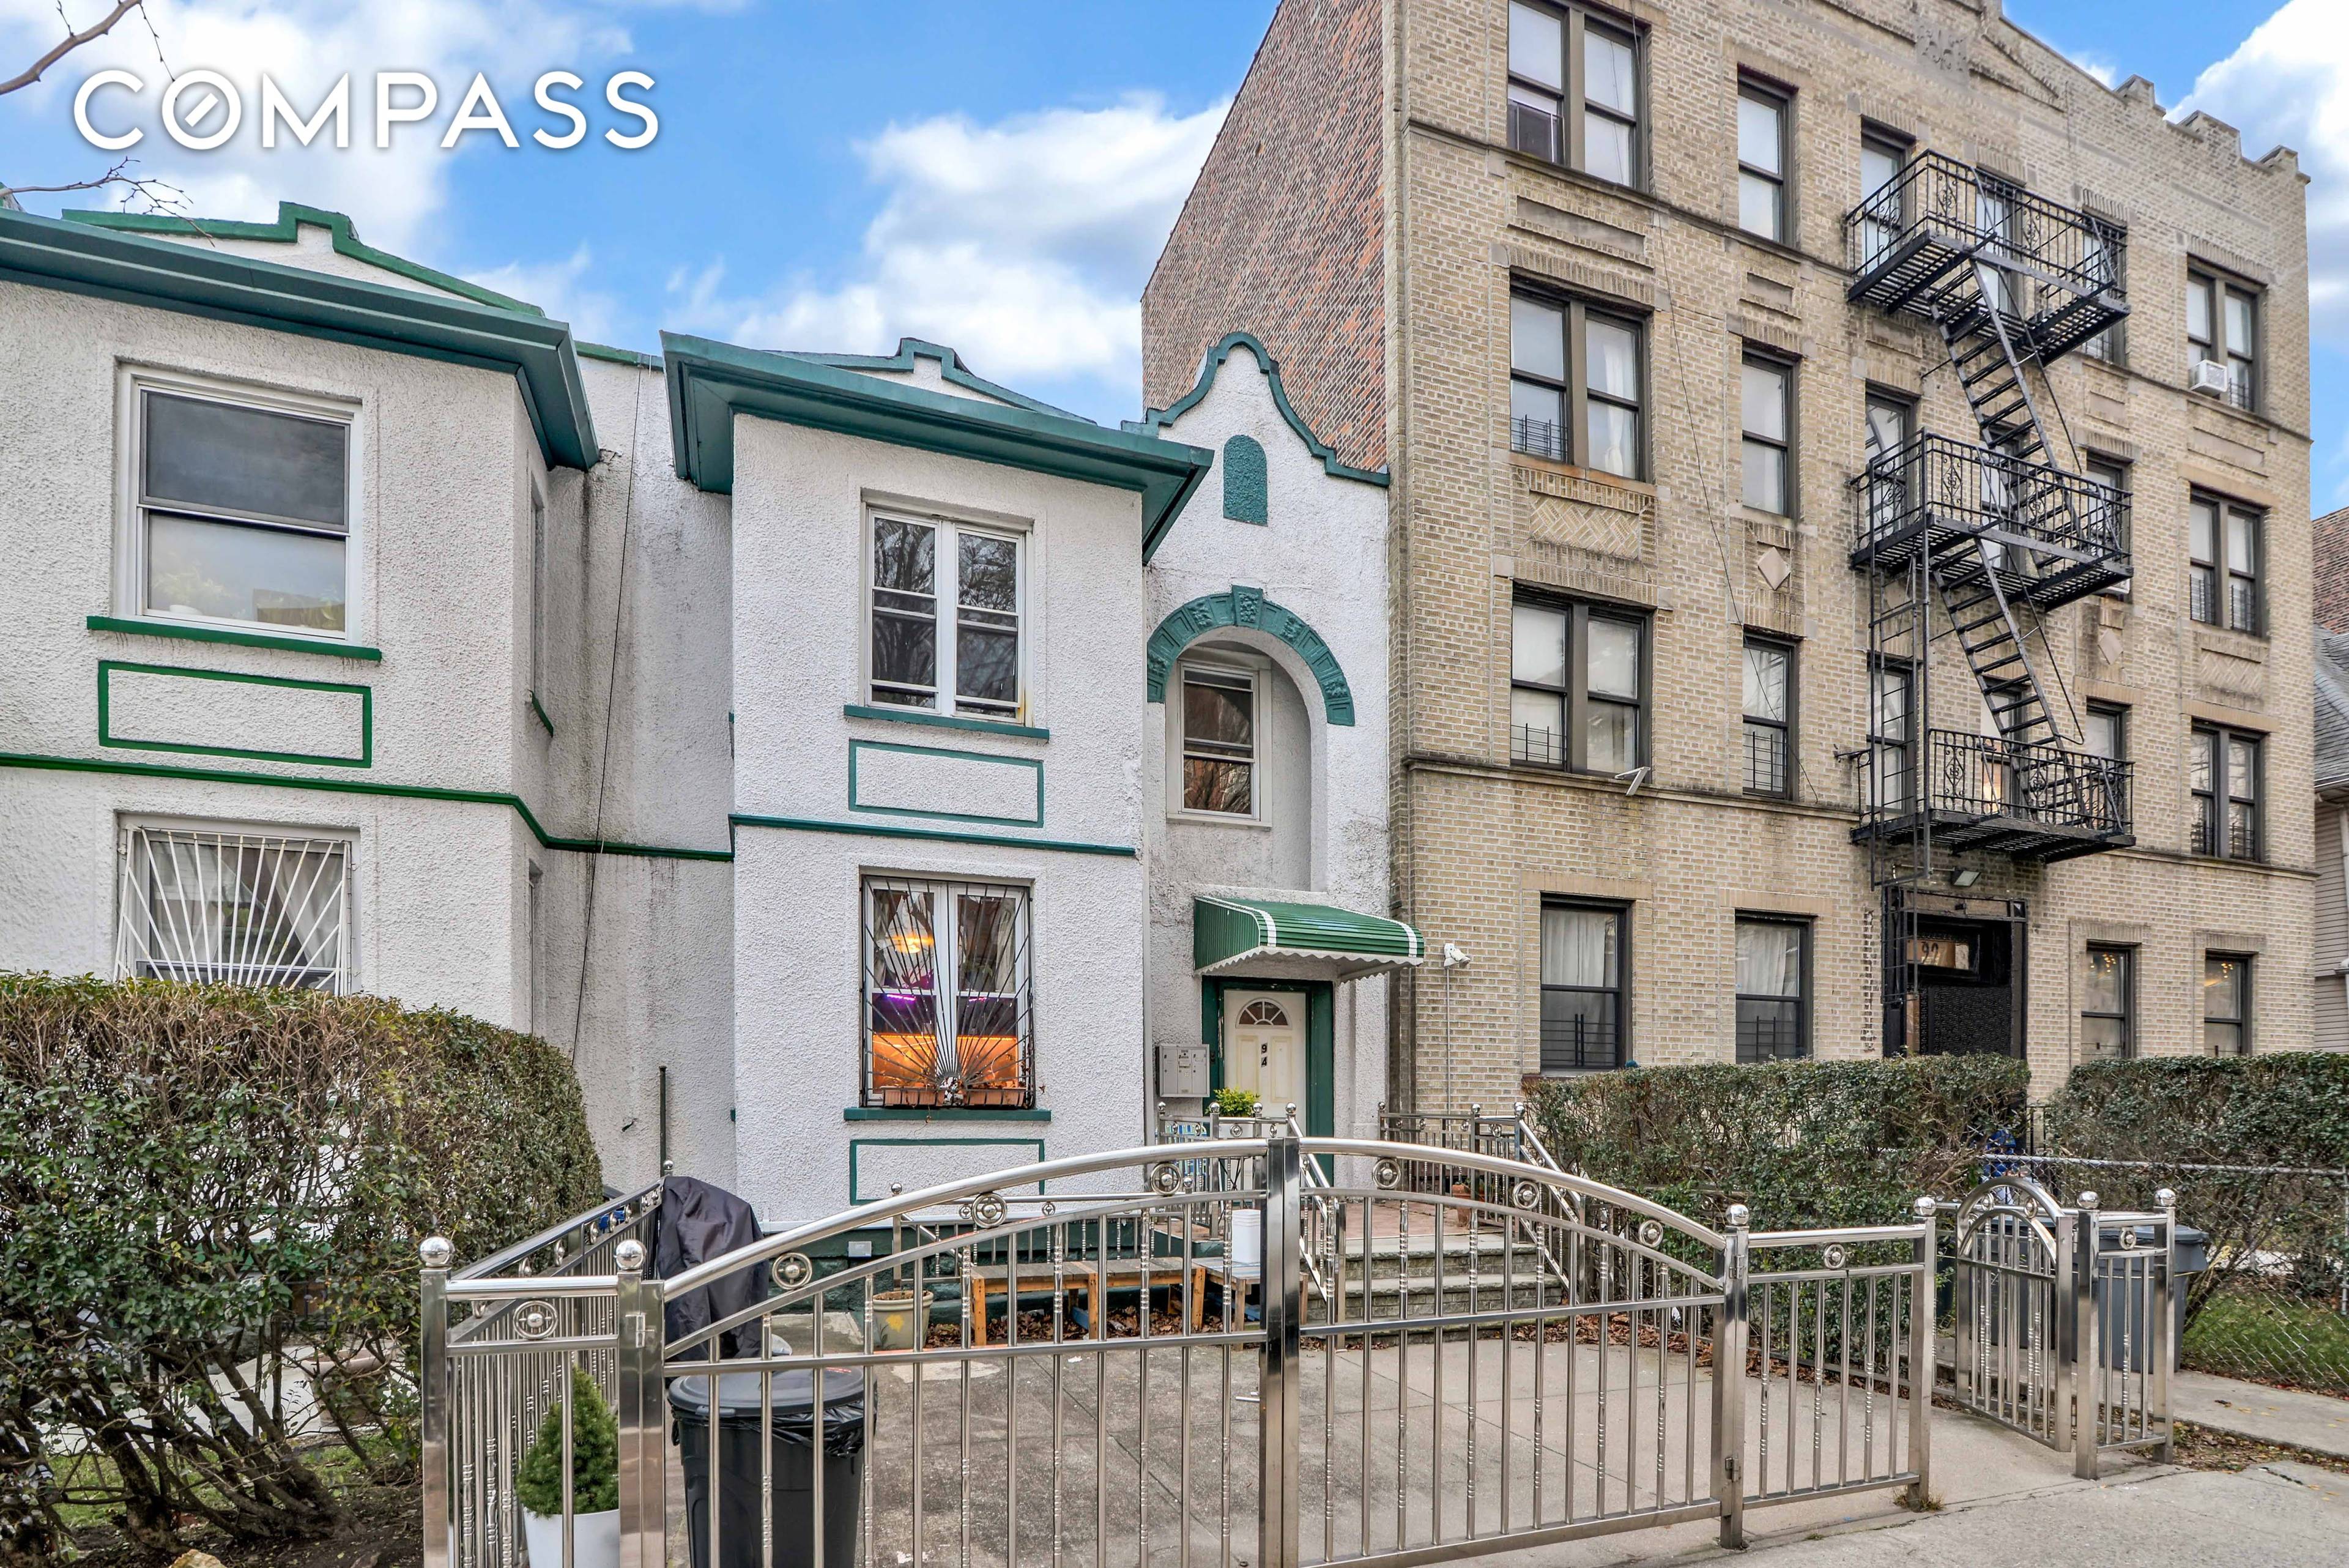 Introducing 94 Hawthorne St, Brooklyn, NY 11225, a stunning two family attached house nestled in the historic Prospect Lefferts Gardens neighborhood of Brooklyn, NY.